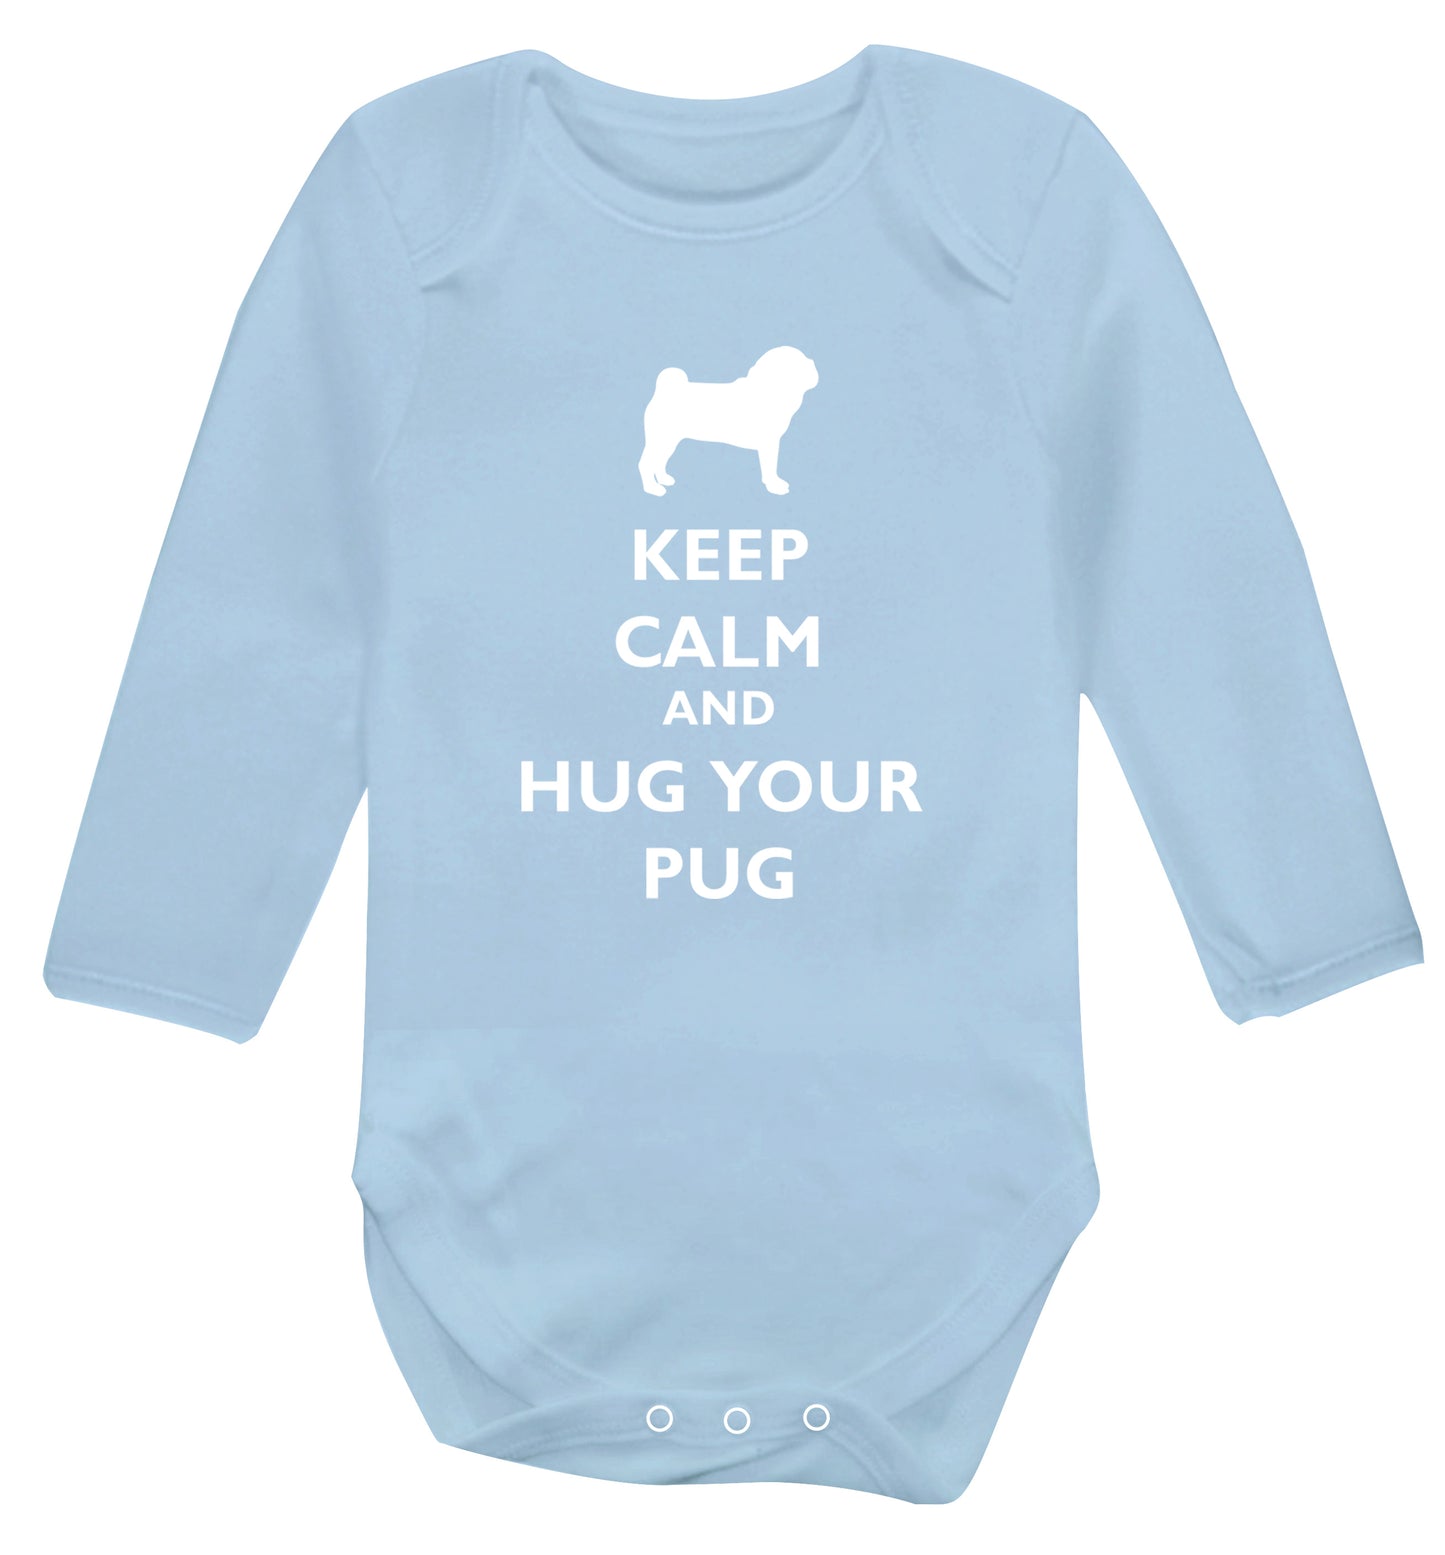 Keep calm and hug your pug Baby Vest long sleeved pale blue 6-12 months